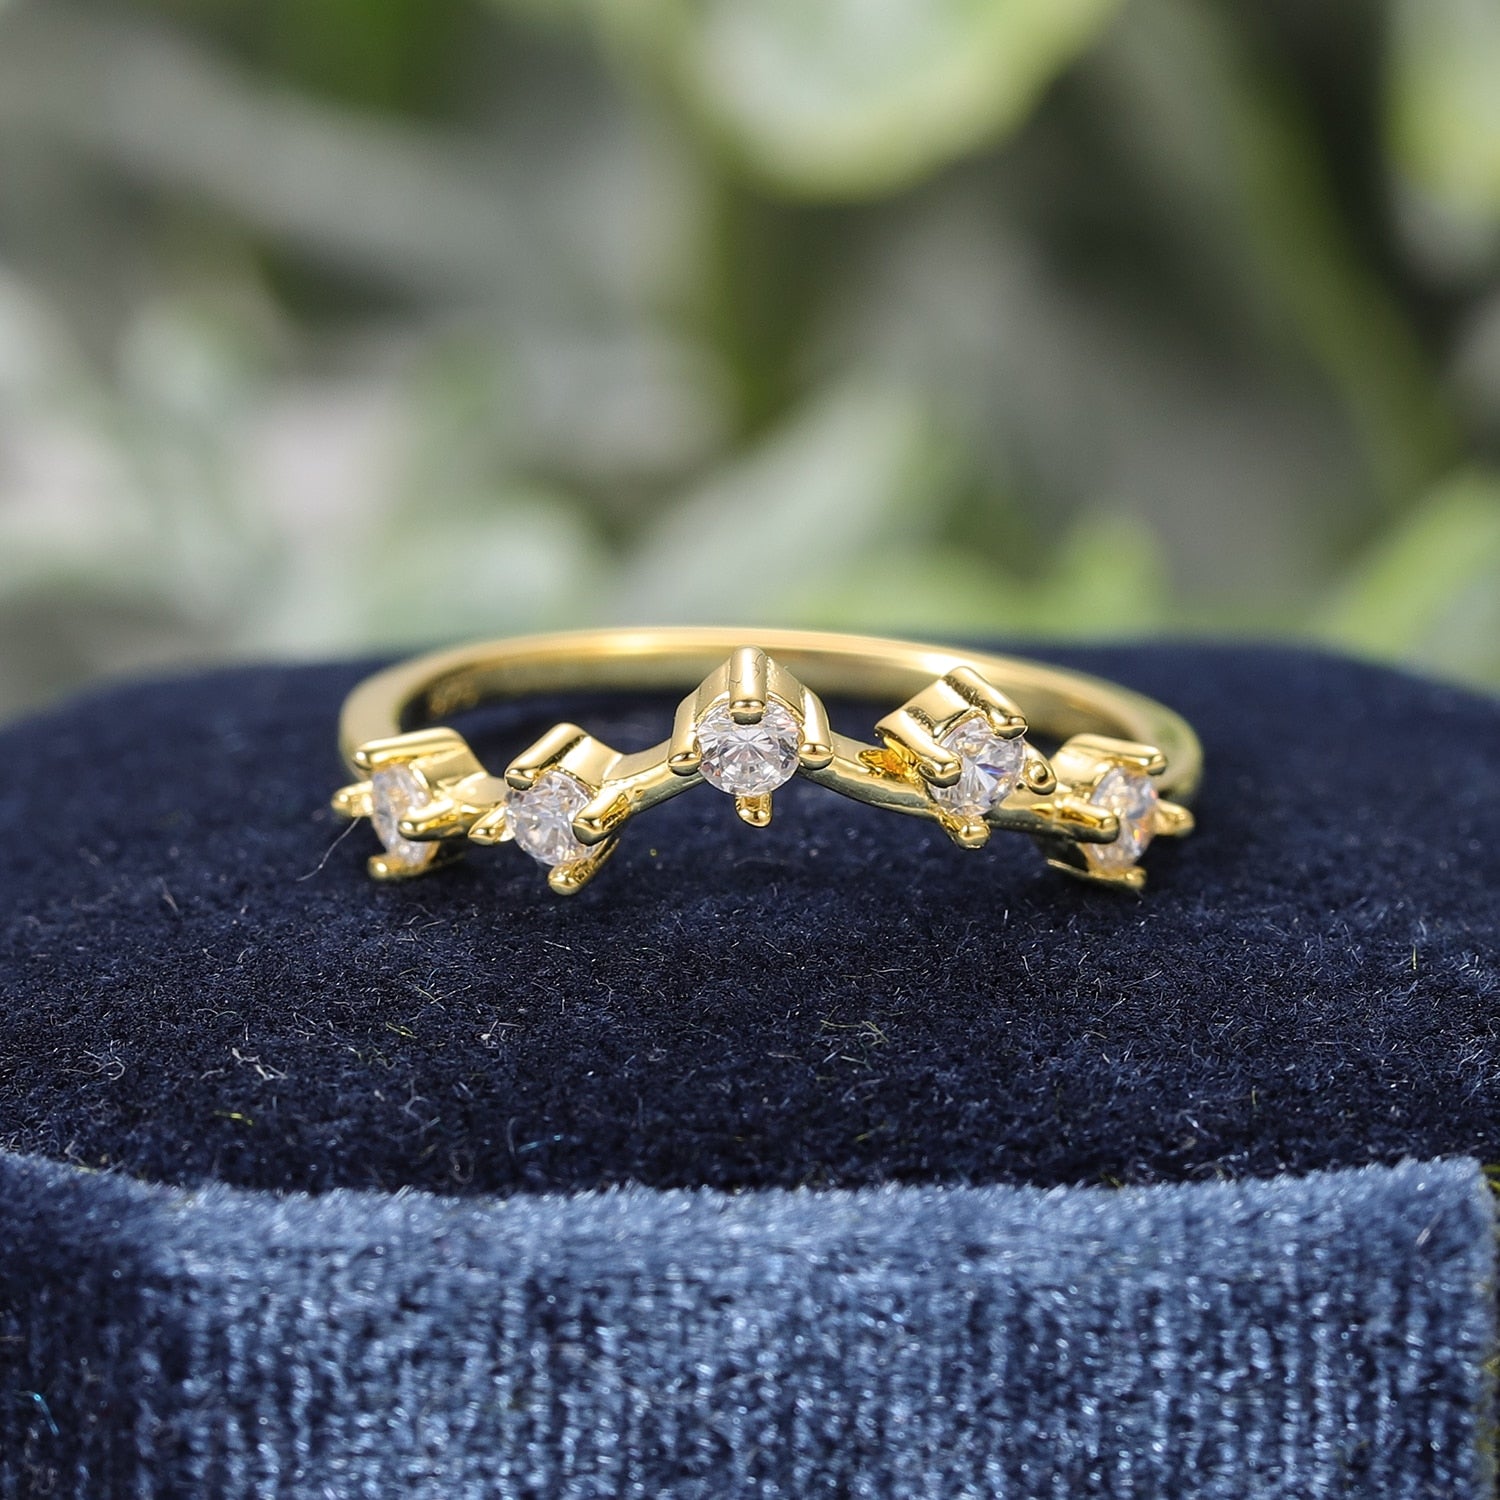 A gold chevron style wedding ring set with 5 small round spaced apart moissanites.